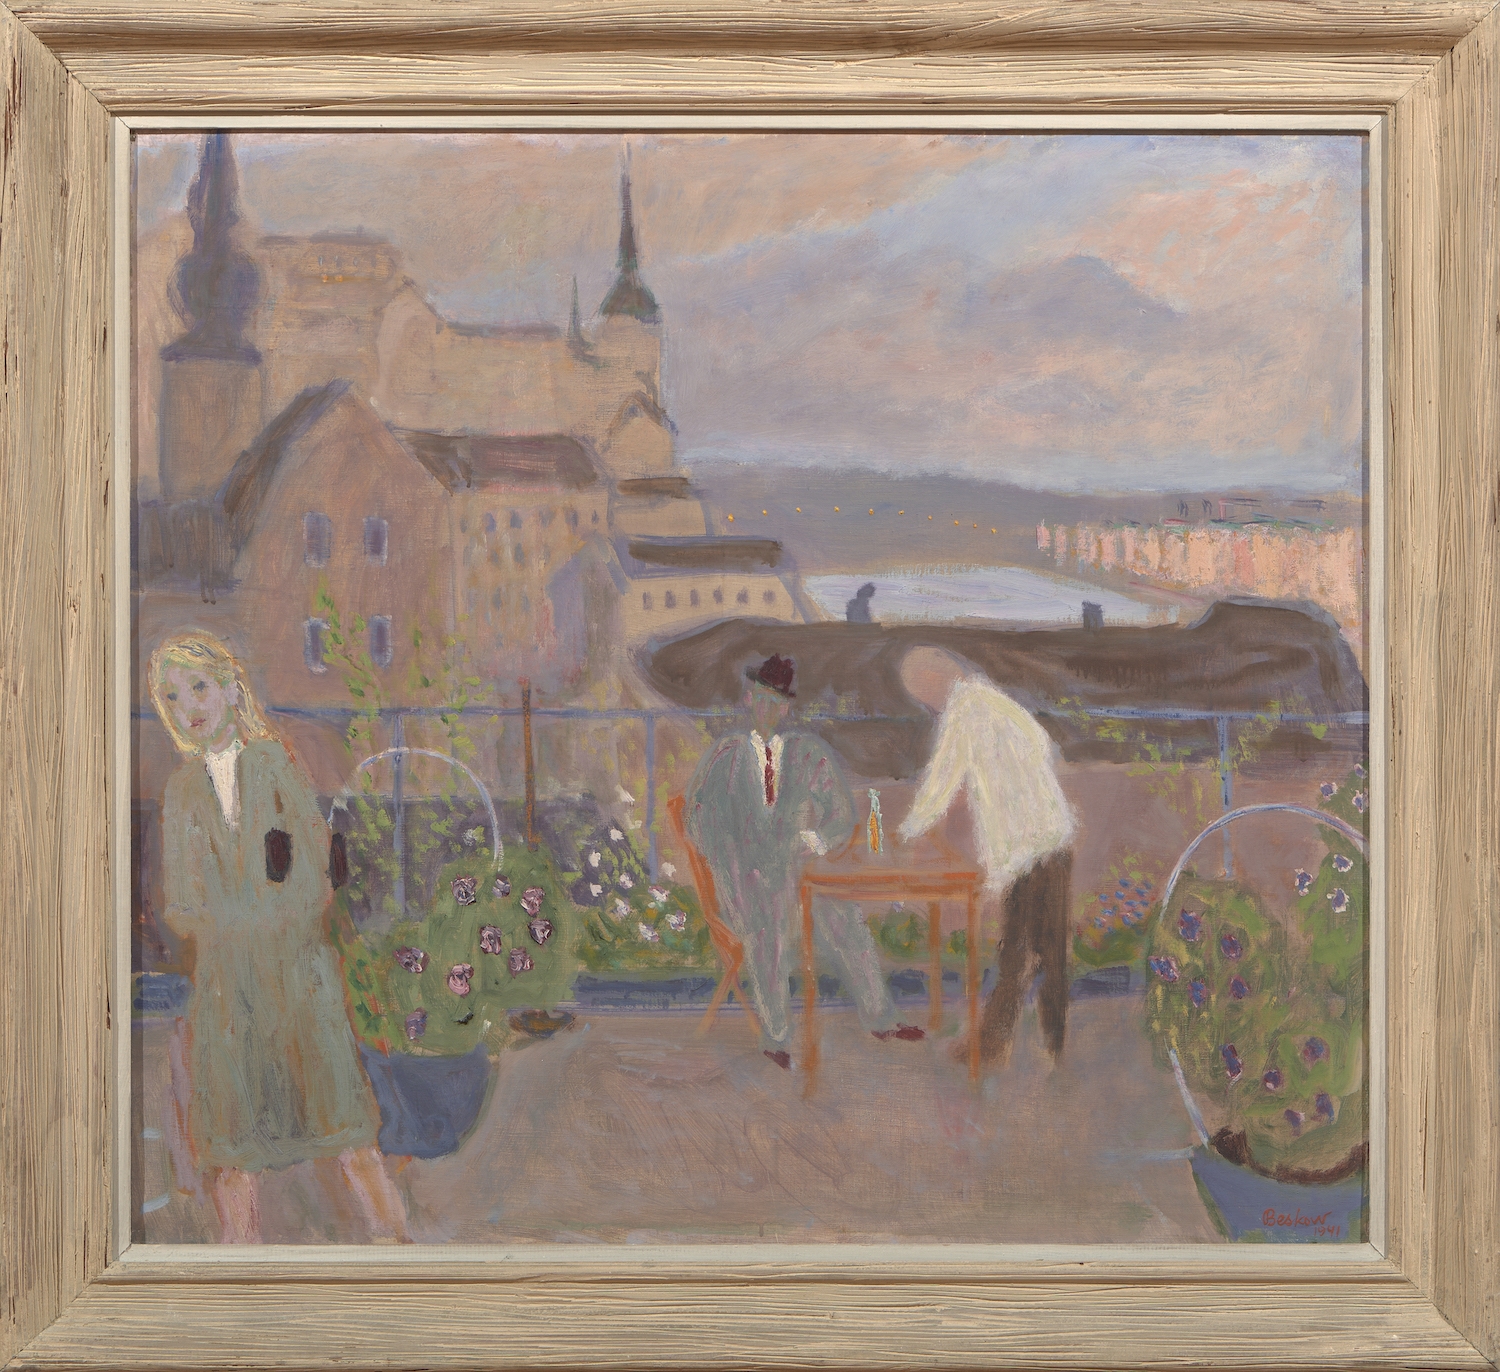 Artwork by Bo Beskow, On The Terrace, Made of oil on canvas